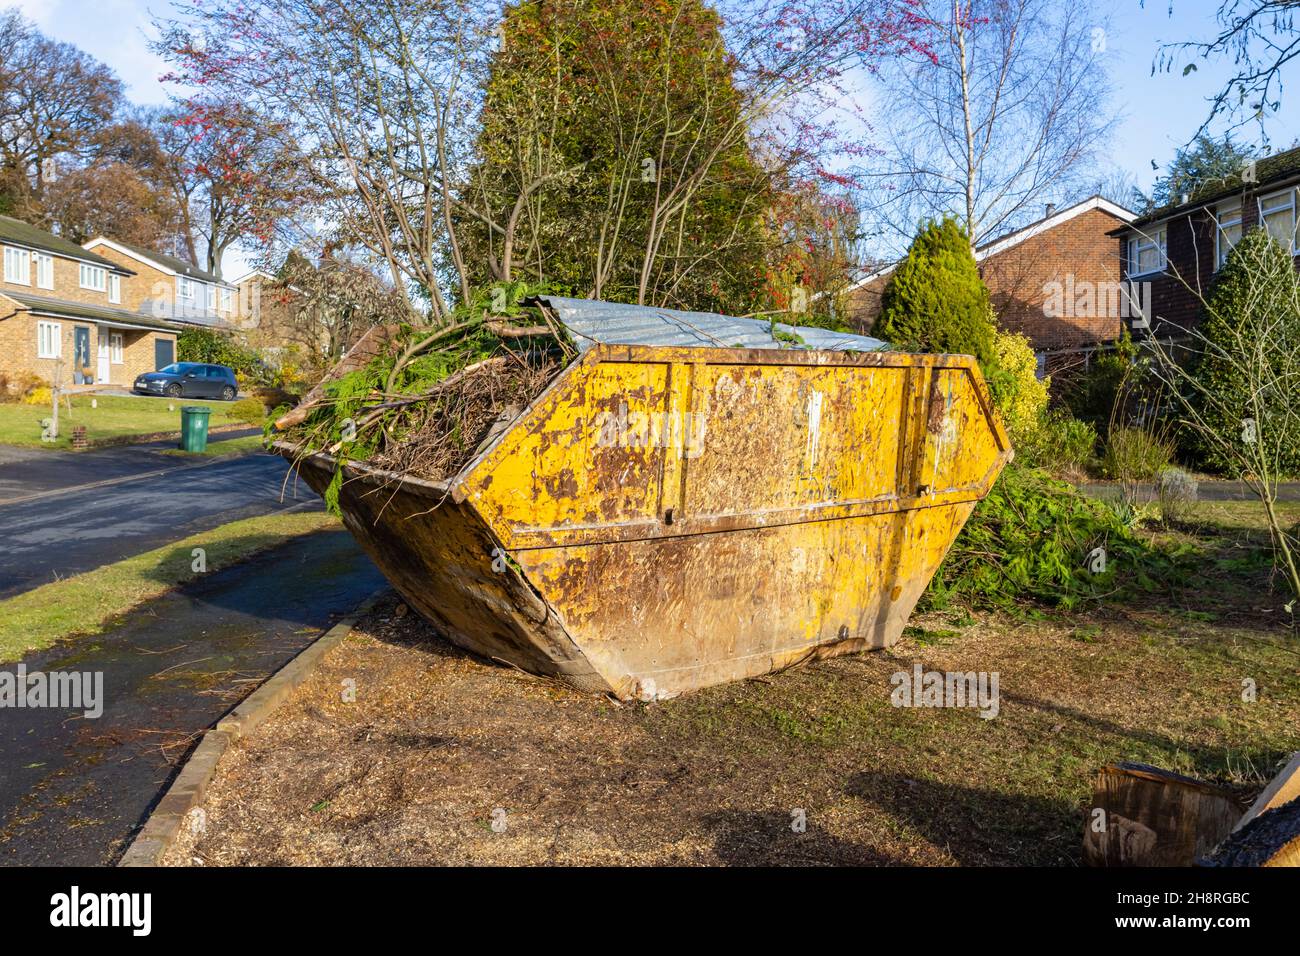 A large rusting, battered waste disposal skip full of branches and garden waste materials on the front garden of a road in Surrey, south-east England Stock Photo